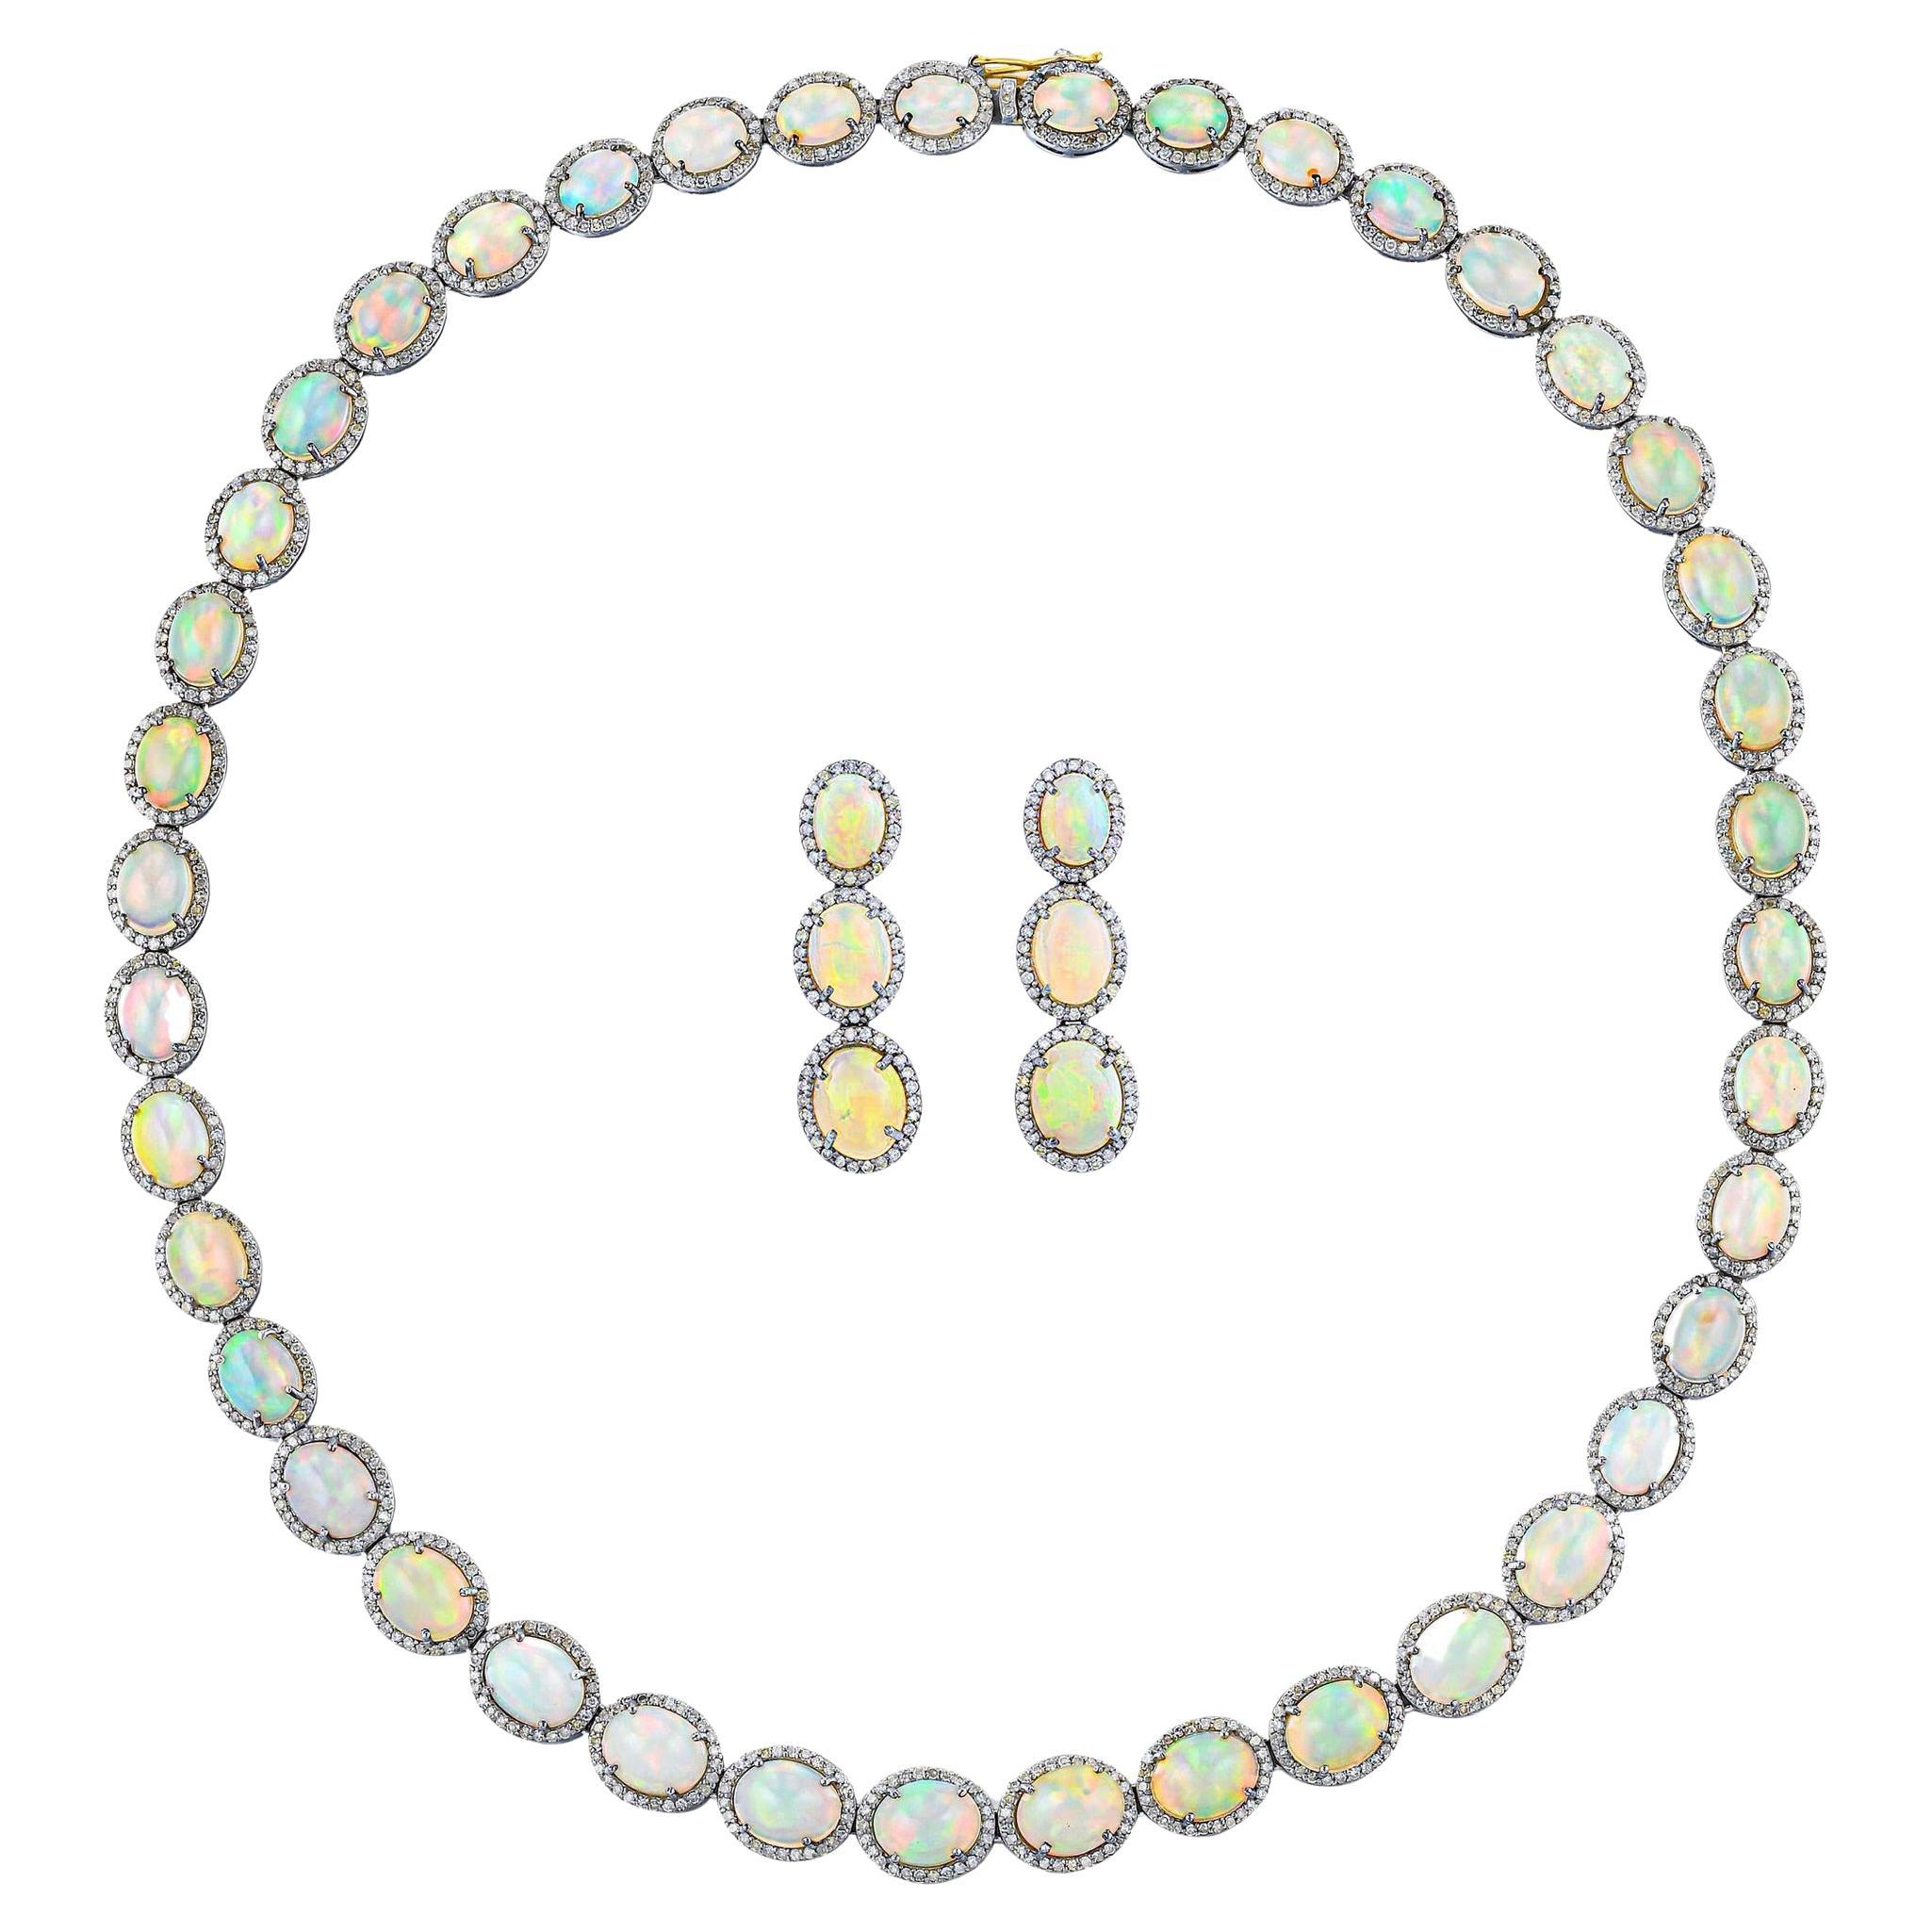 Important Opal Jewelry Suite Set With Diamonds 69 Carats Total For Sale